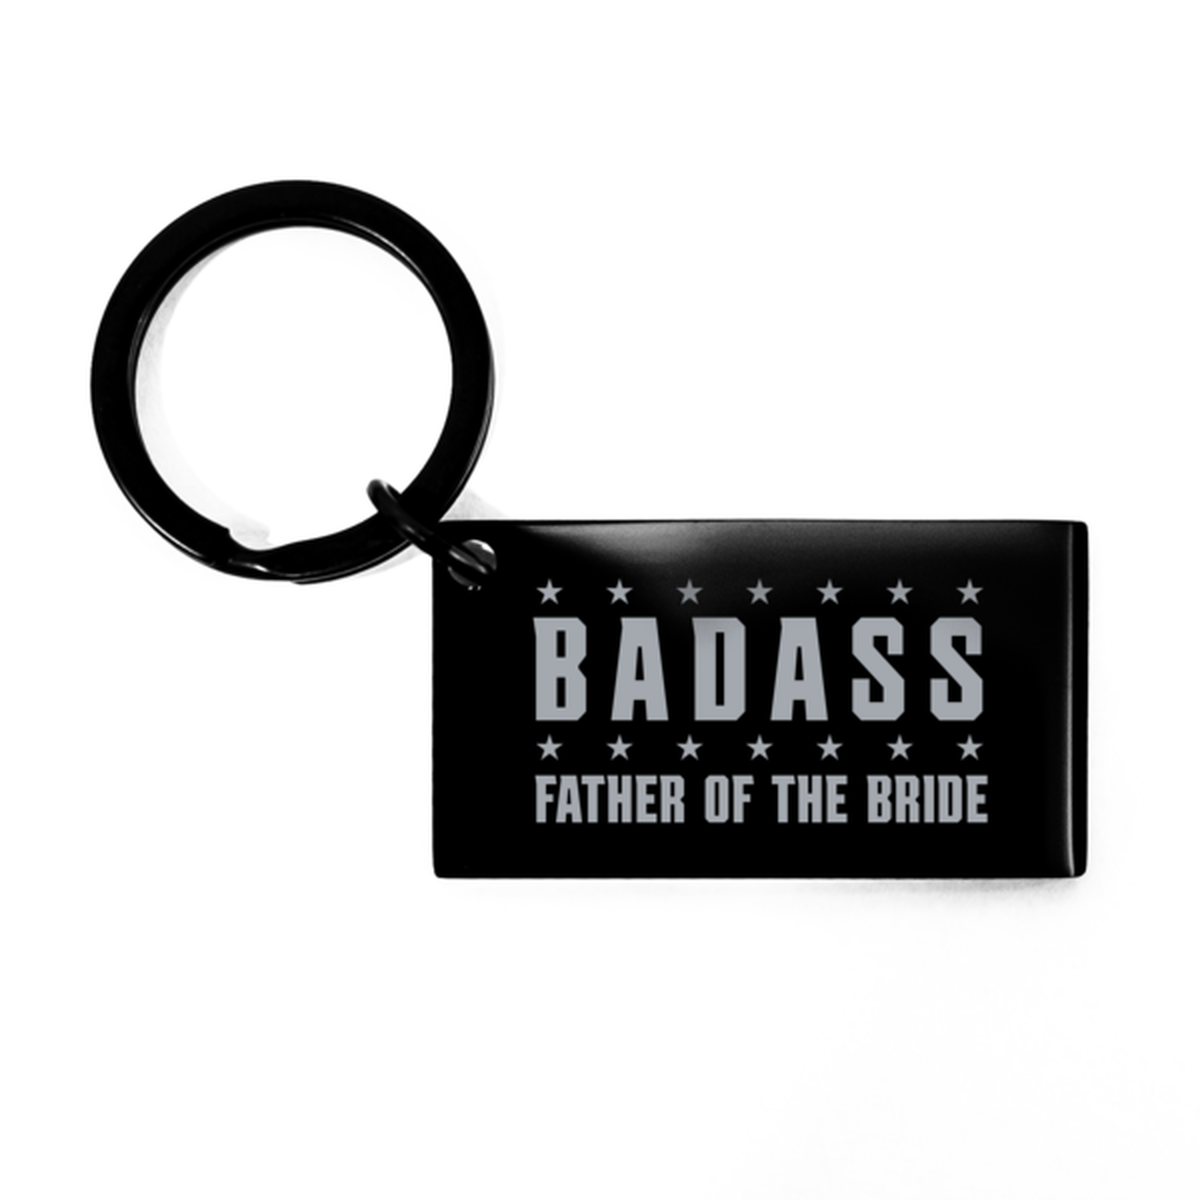 Father of the bride Black Keychain, Badass Father of the Bride, Funny Family Gifts  Keyring For Father of the bride From Son Daughter